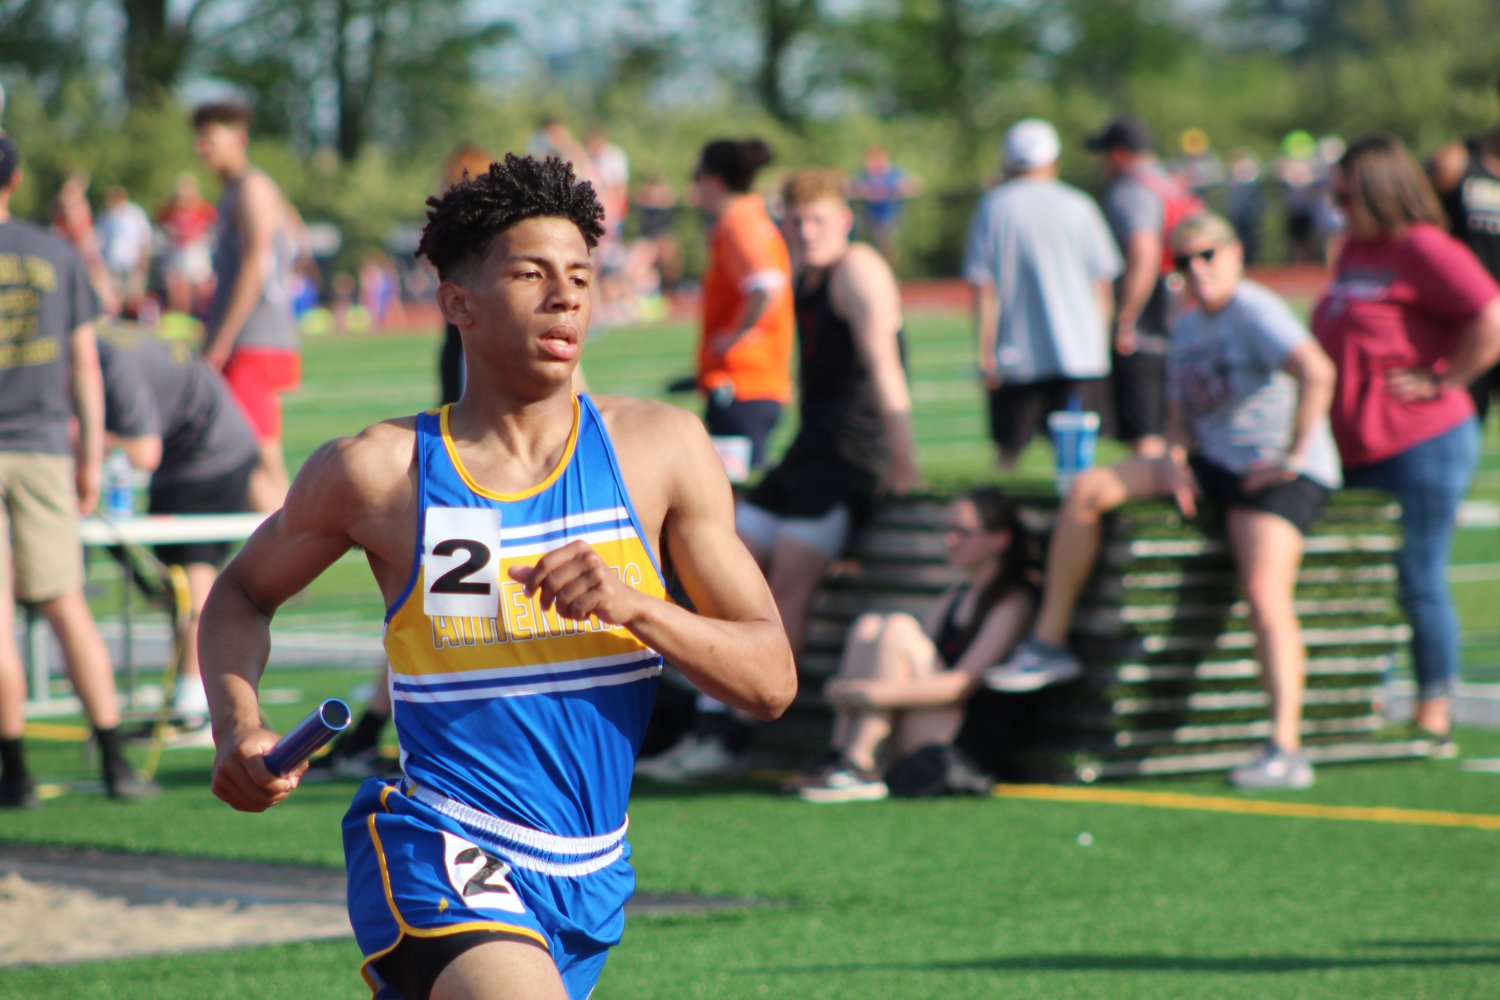 Tyson Fuller was named the champion in the 800 meter run for the Athenians.